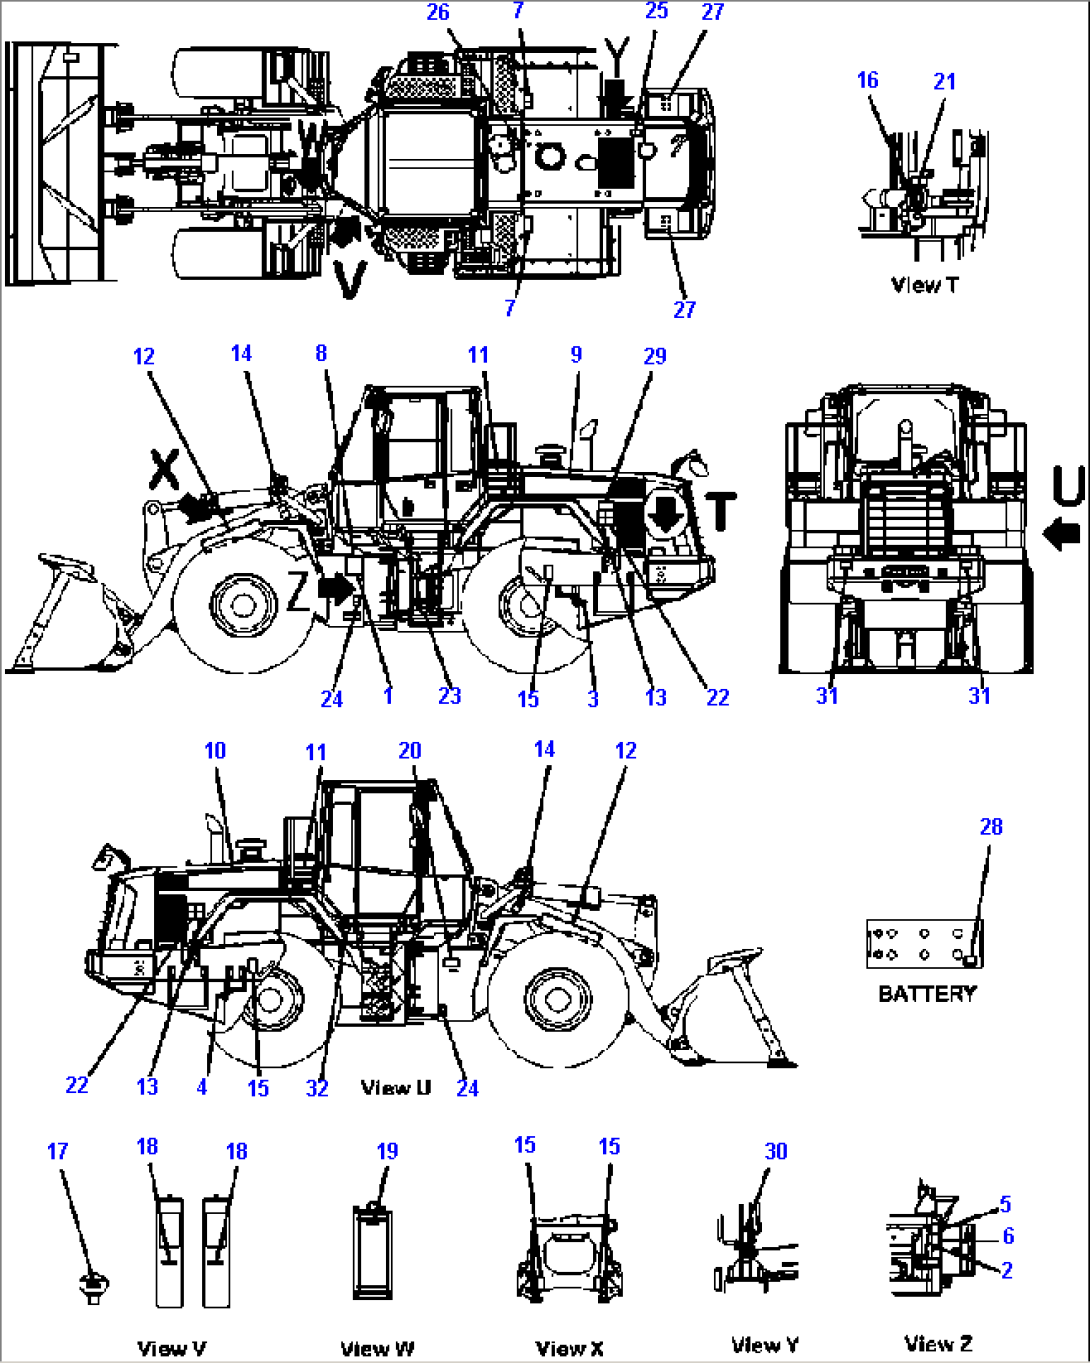 U0100-01A0 MARKS AND PLATES CHASSIS DECALS